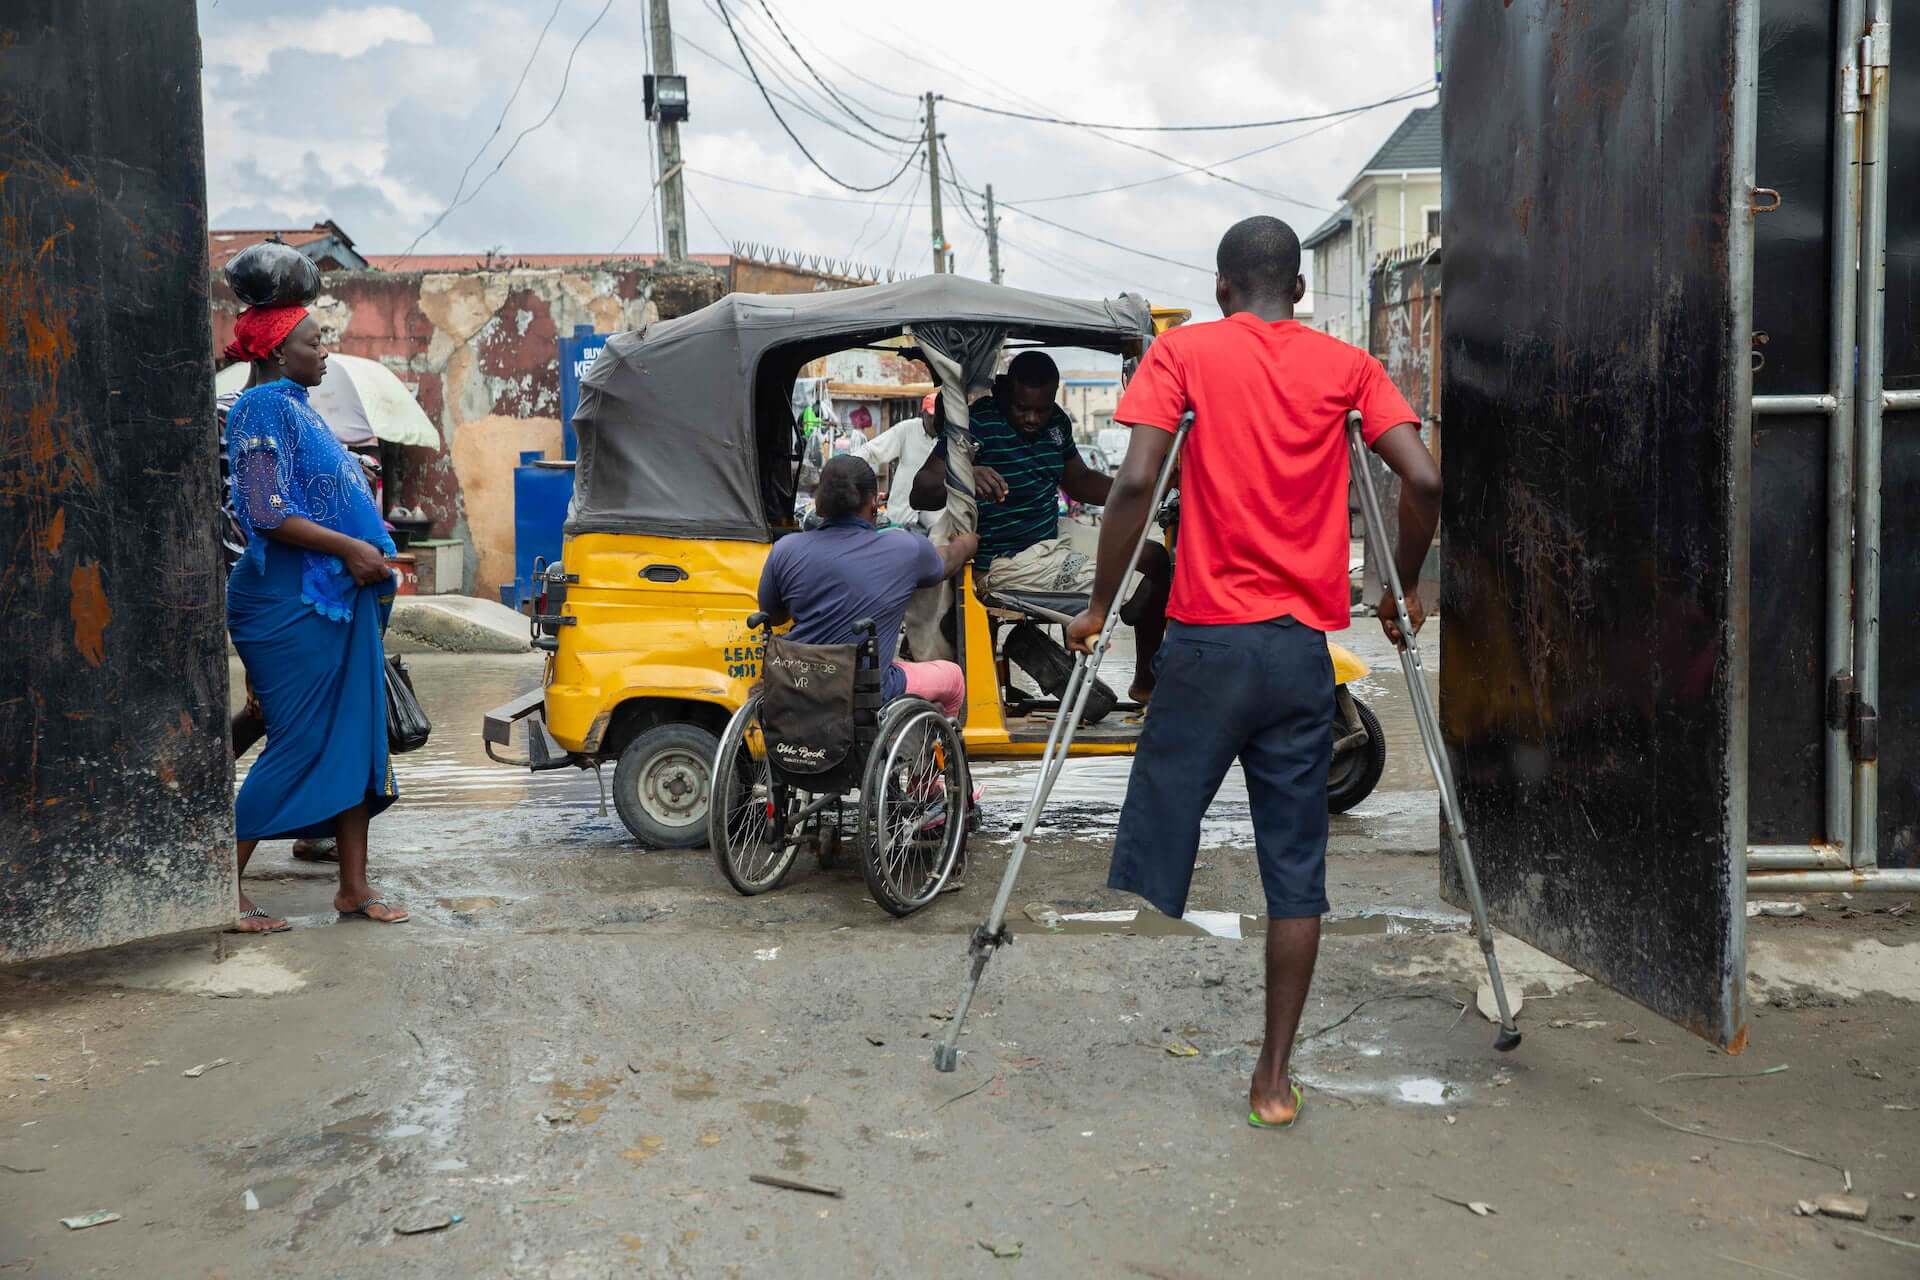 Olajumoke boards an inaccessible keke napep – a yellow and black tricycle. A man with an amputated leg using crutches and a woman watch.